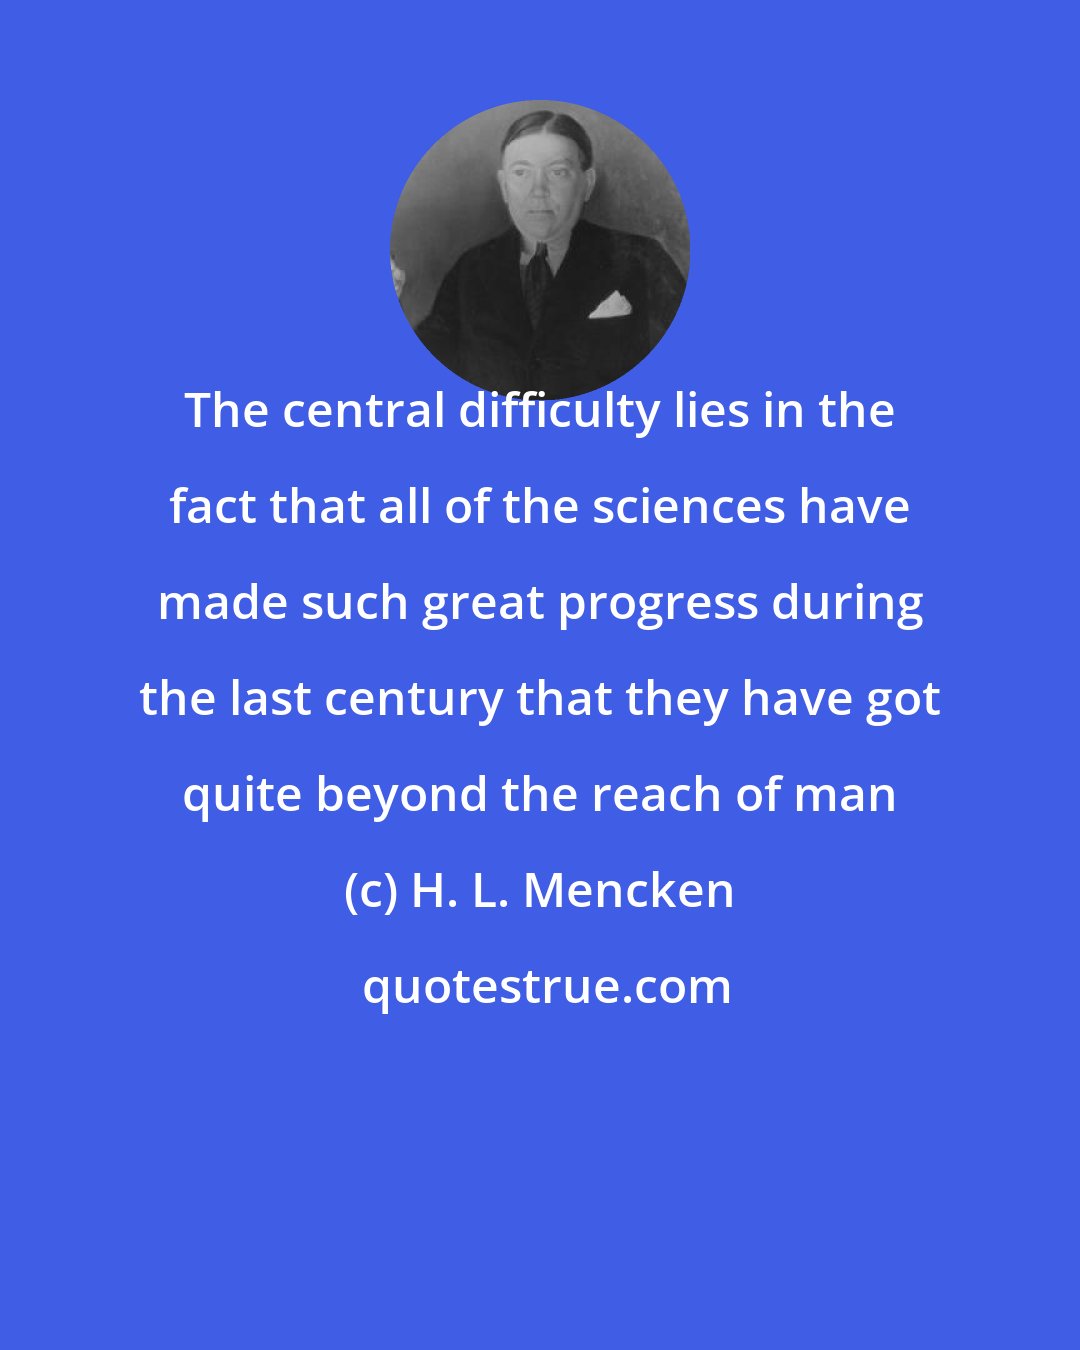 H. L. Mencken: The central difficulty lies in the fact that all of the sciences have made such great progress during the last century that they have got quite beyond the reach of man